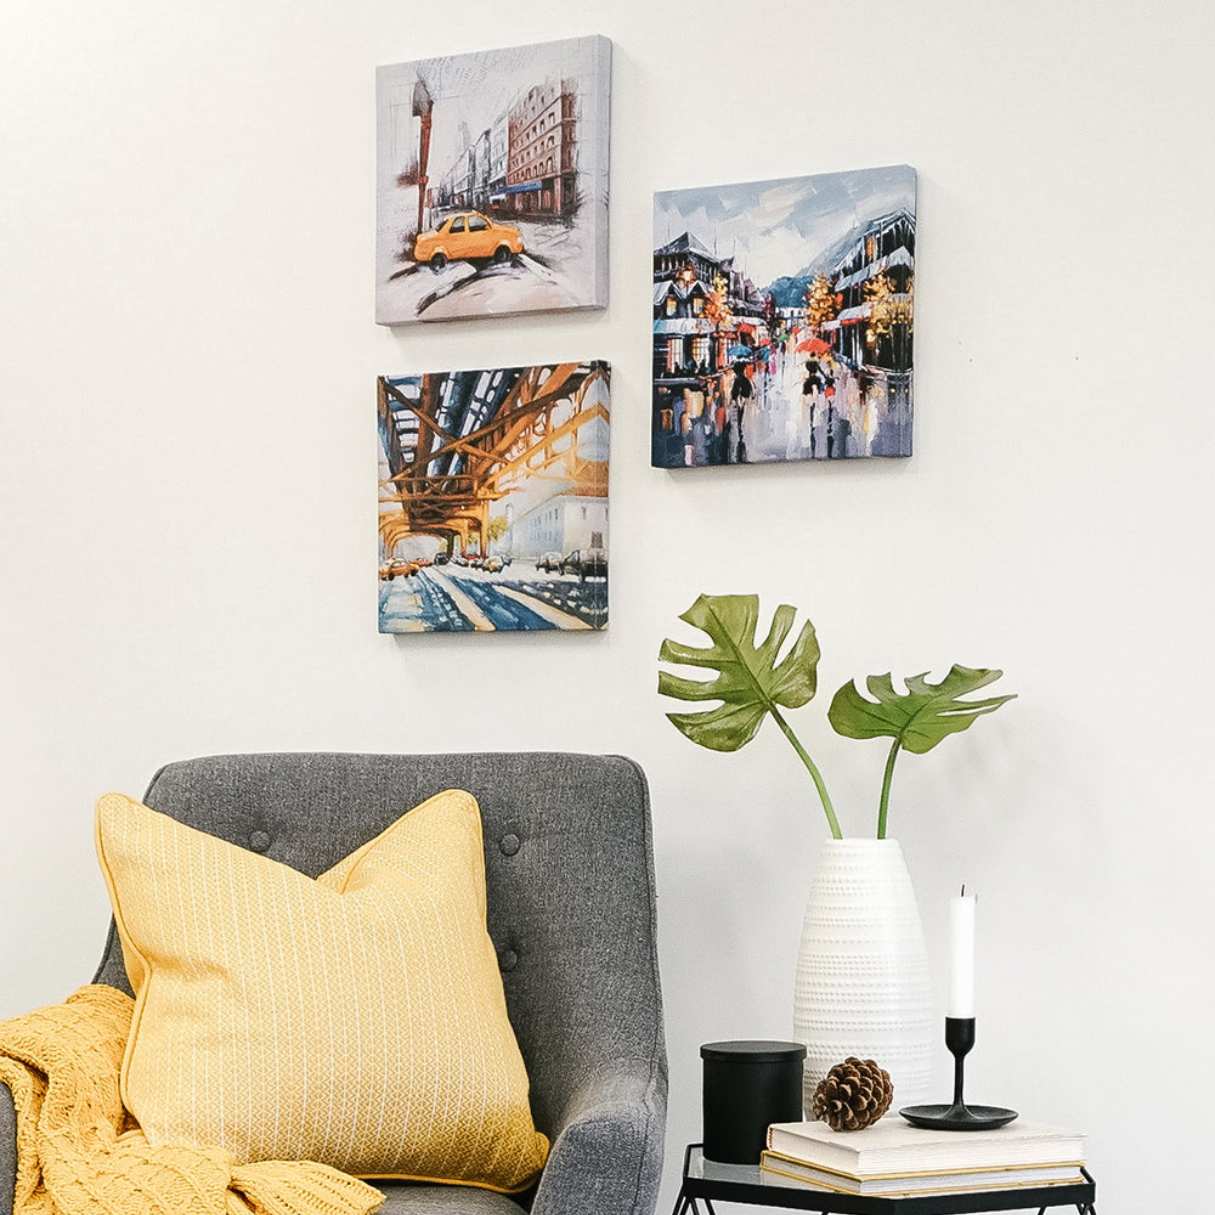 How To Hang 3 Piece Wall Art